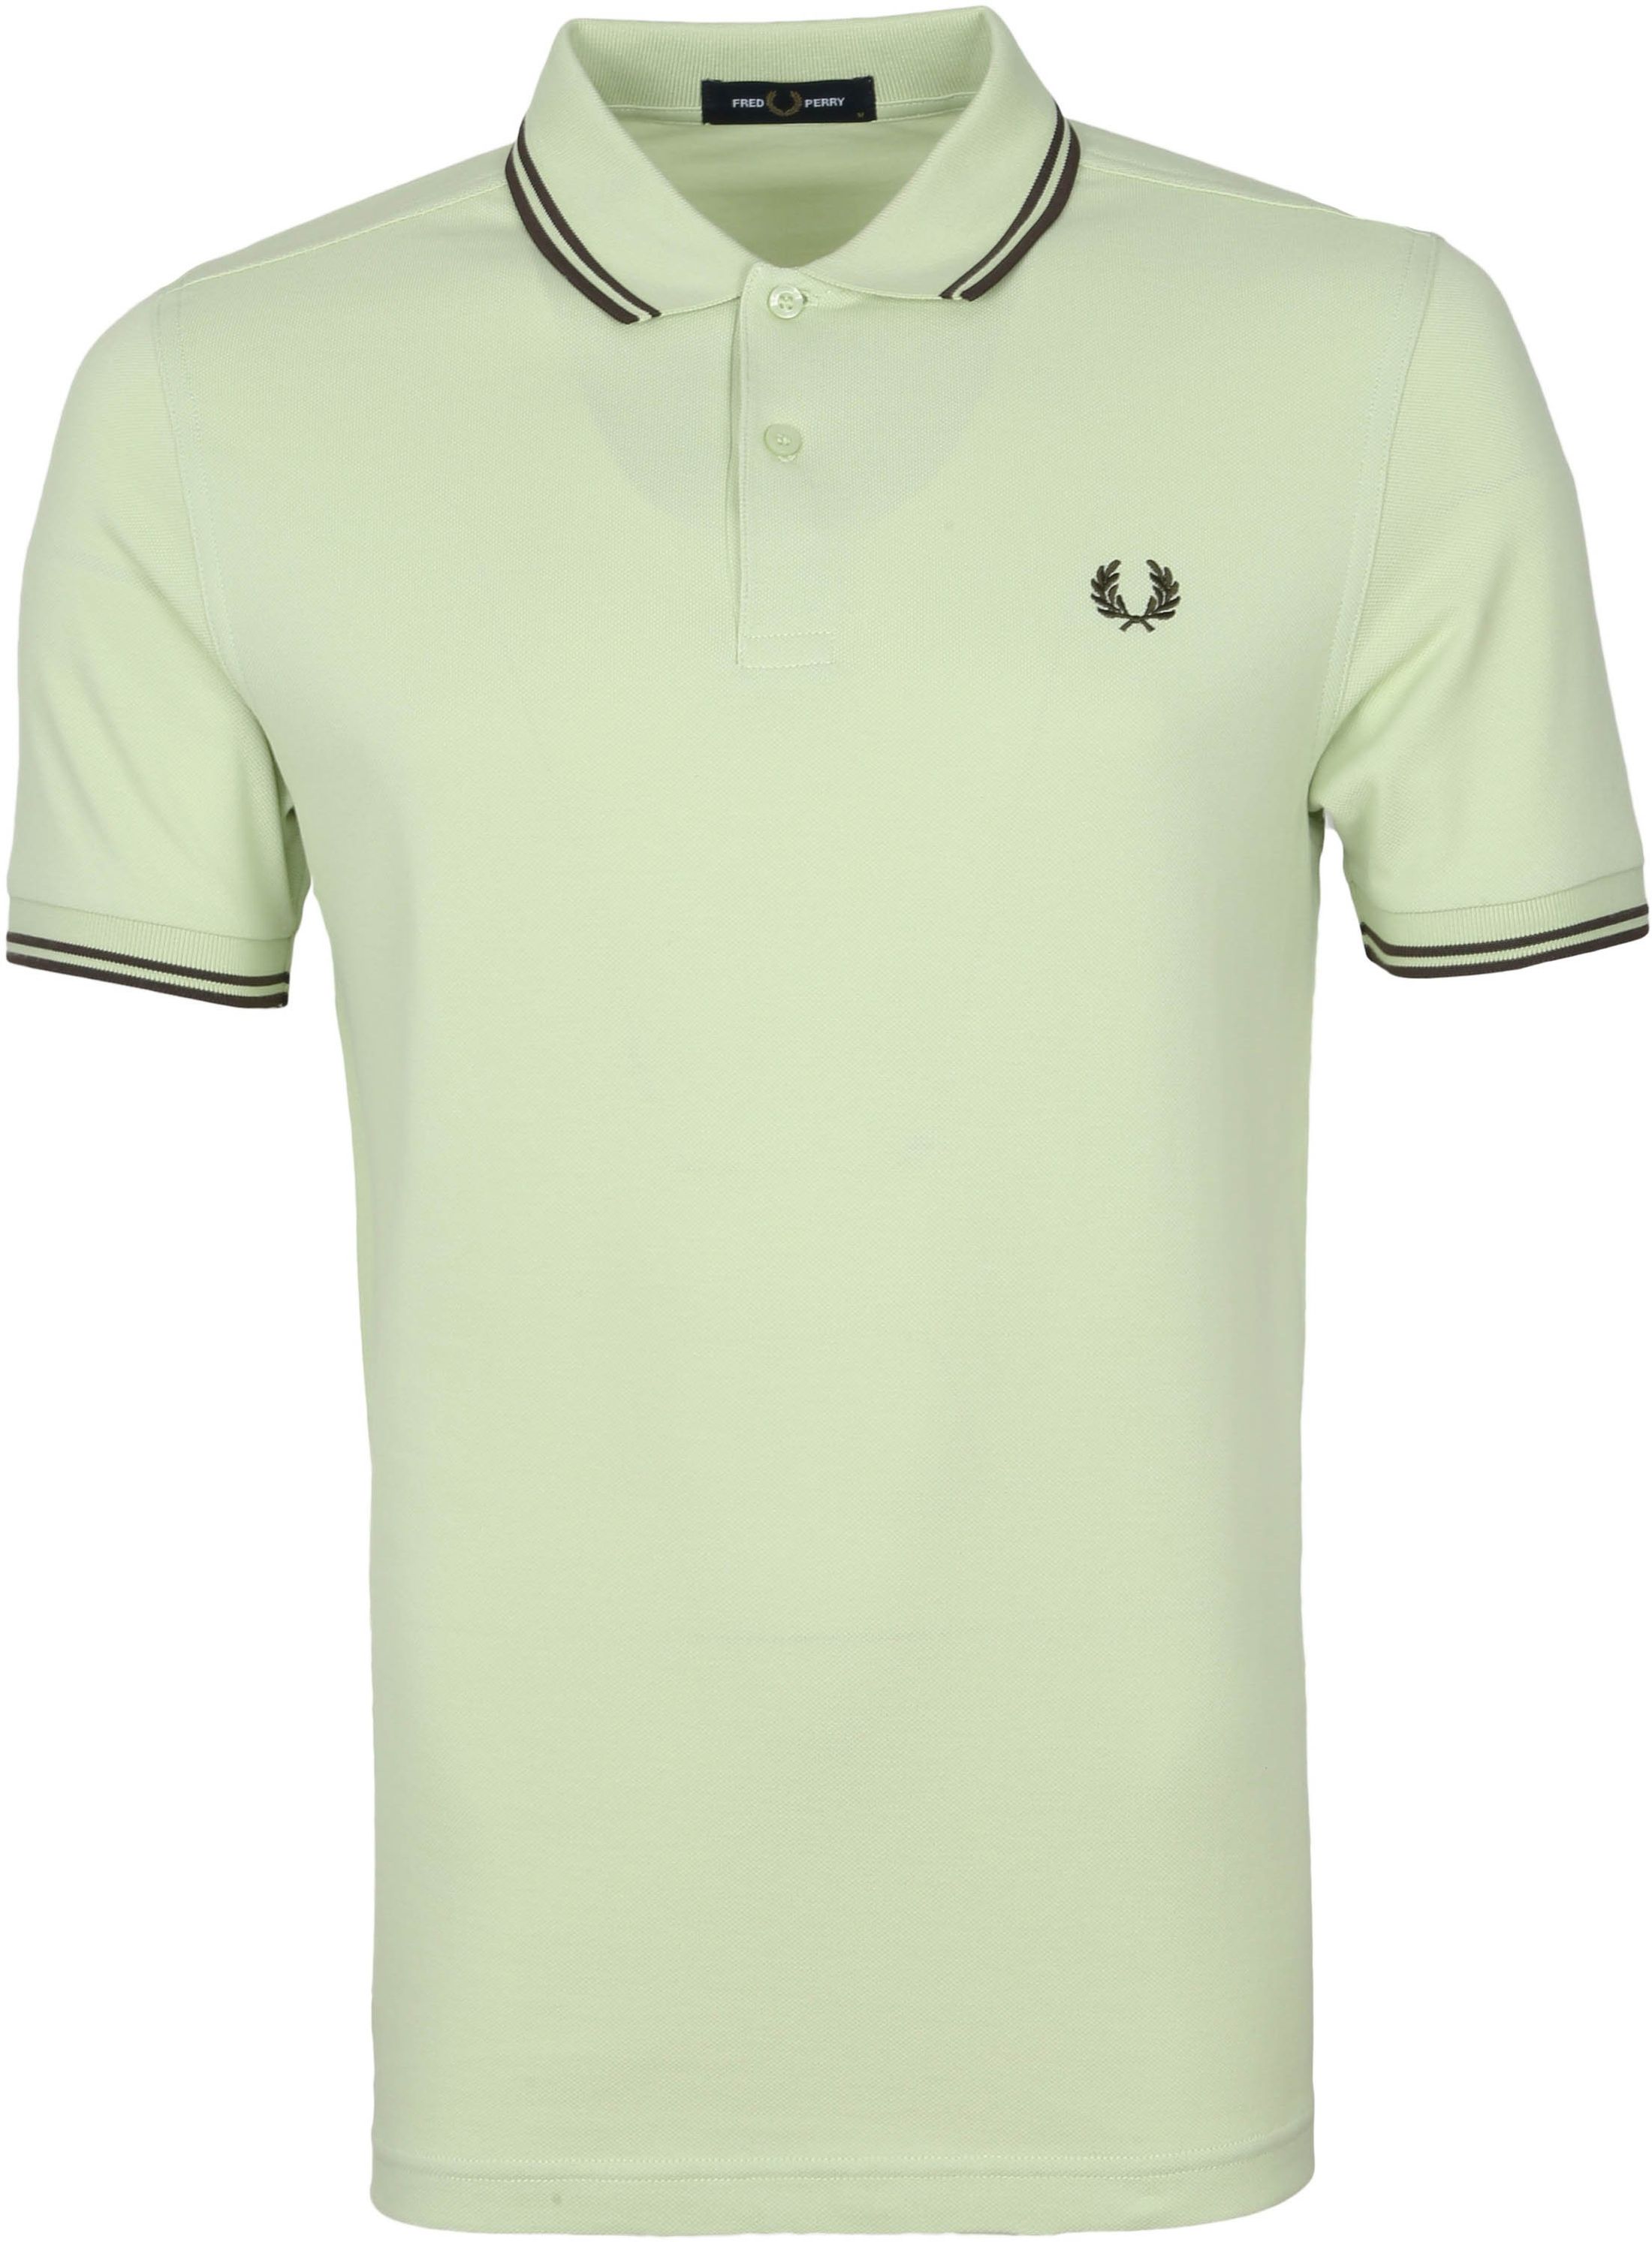 Fred Perry Polo Shirt M3600 Light Green size S